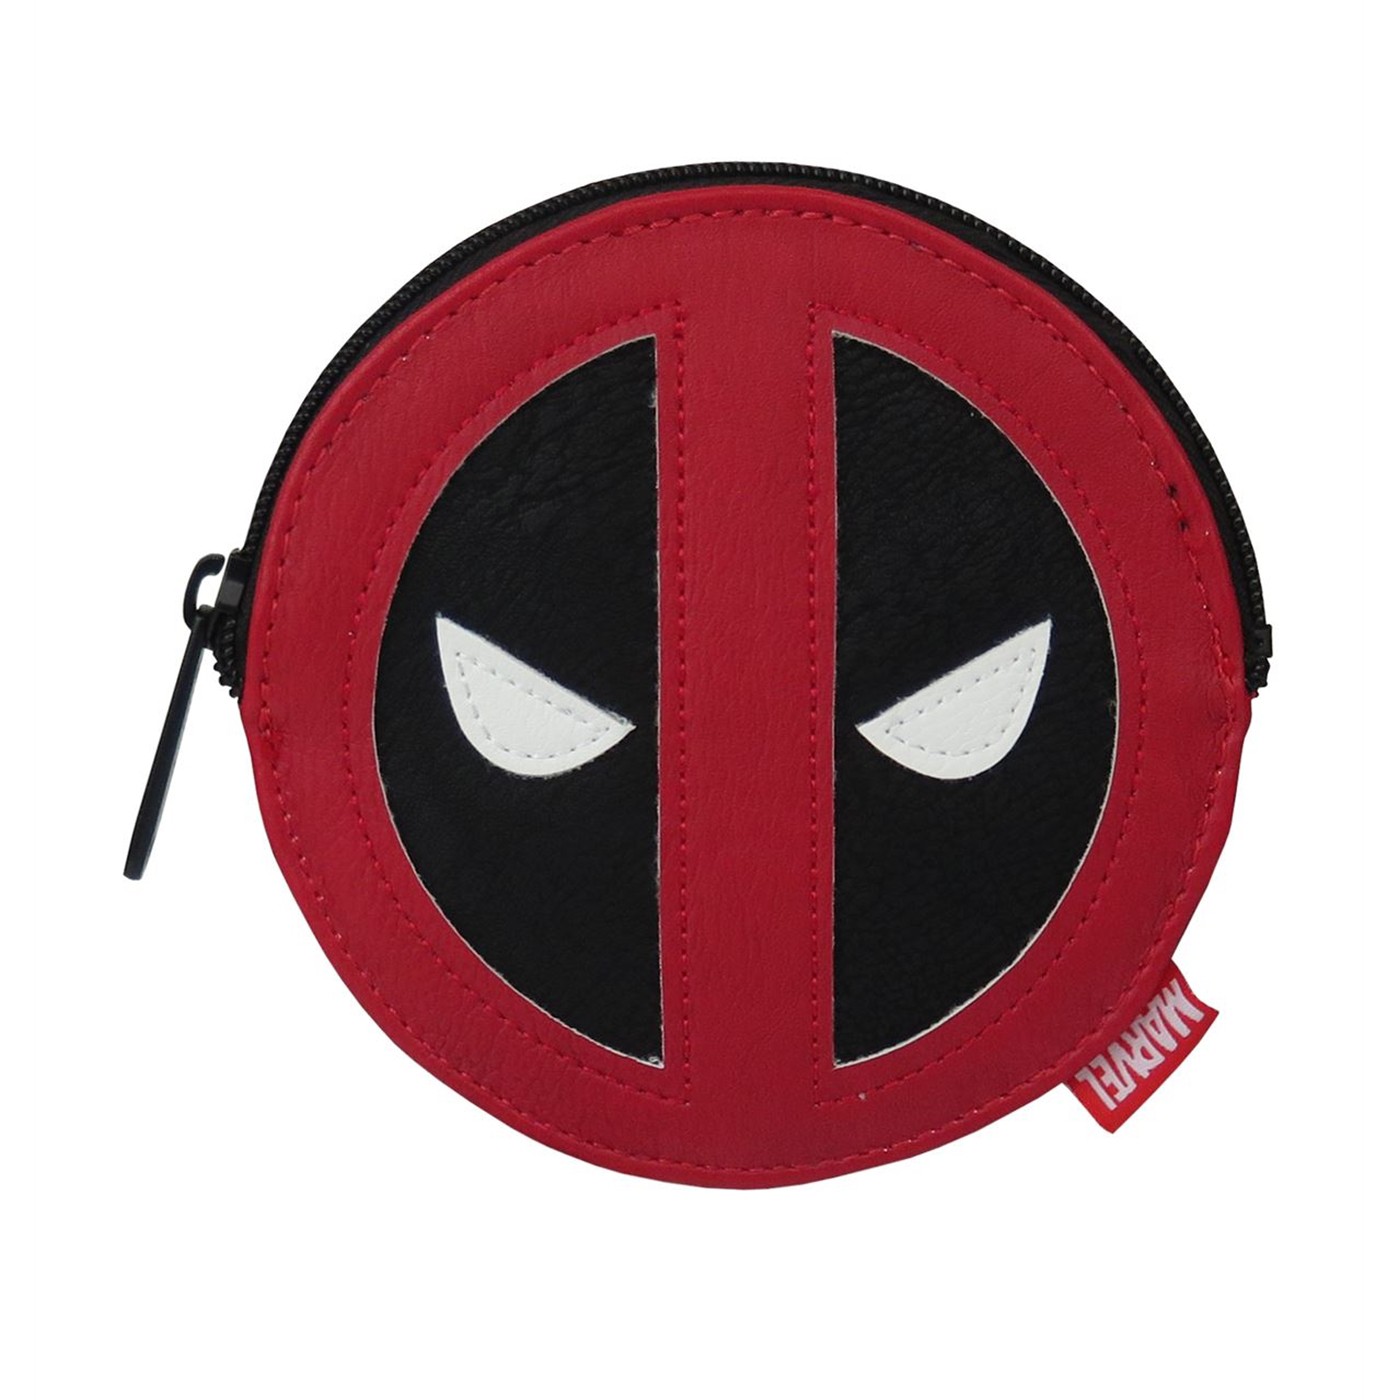 Deadpool Patent Leather Coin Purse